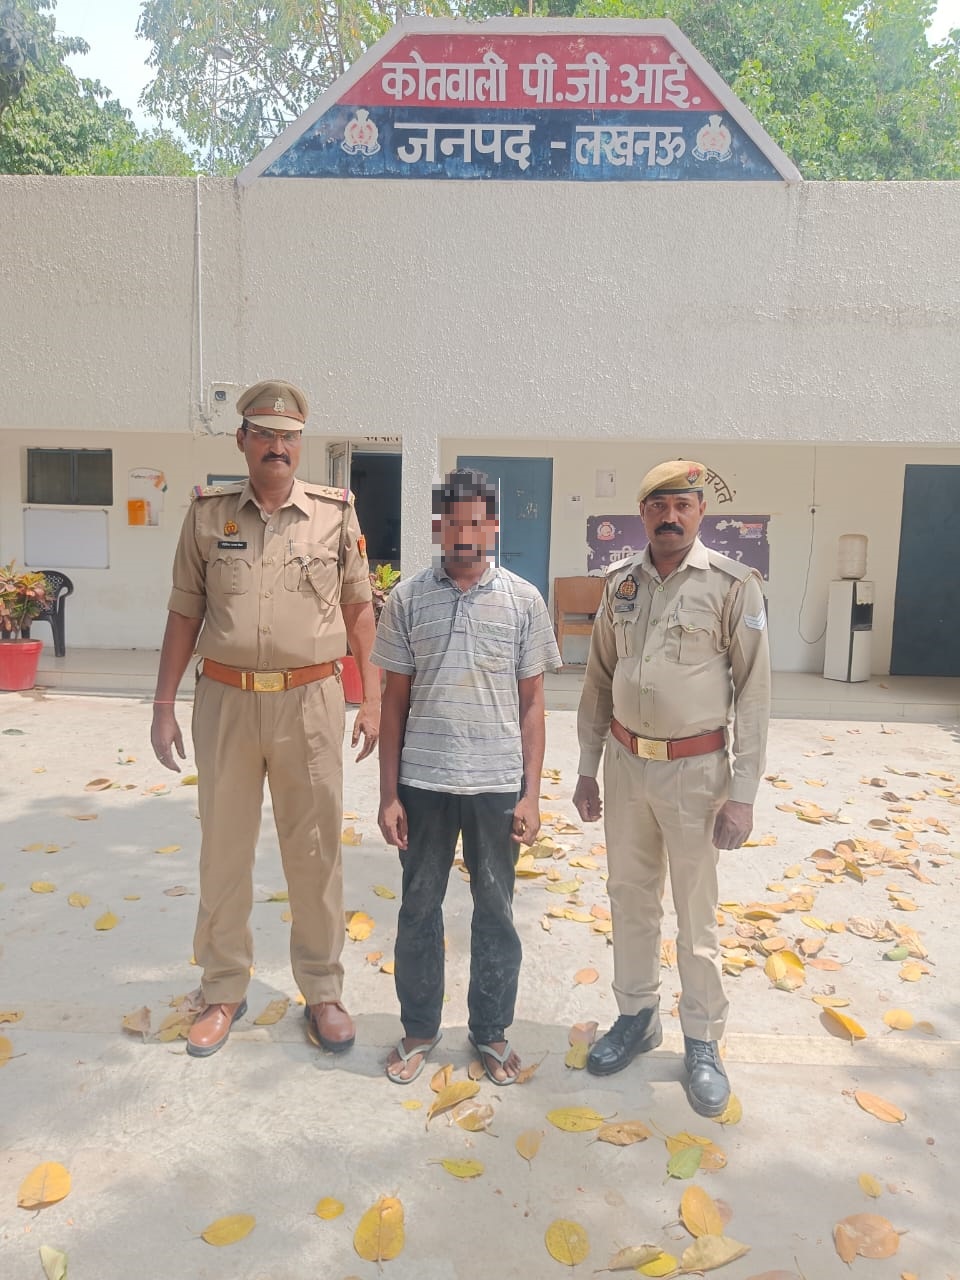 The accused accused of raping the plaintiff/victim and threatening to kill her was arrested by the police station PGI police team.